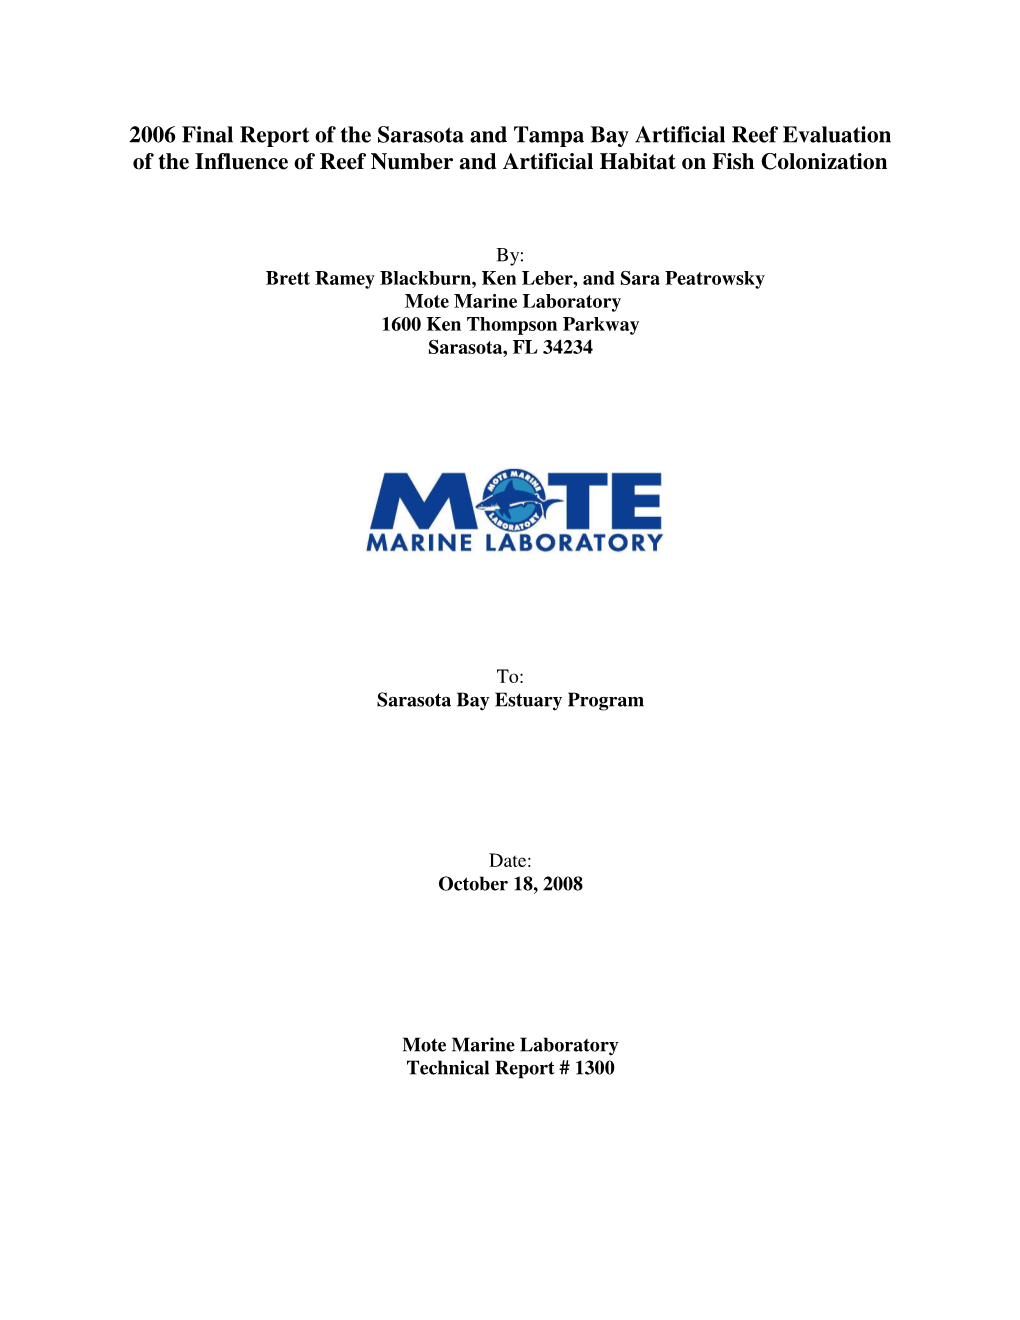 2006 Final Report of the Sarasota and Tampa Bay Artificial Reef Evaluation of the Influence of Reef Number and Artificial Habitat on Fish Colonization